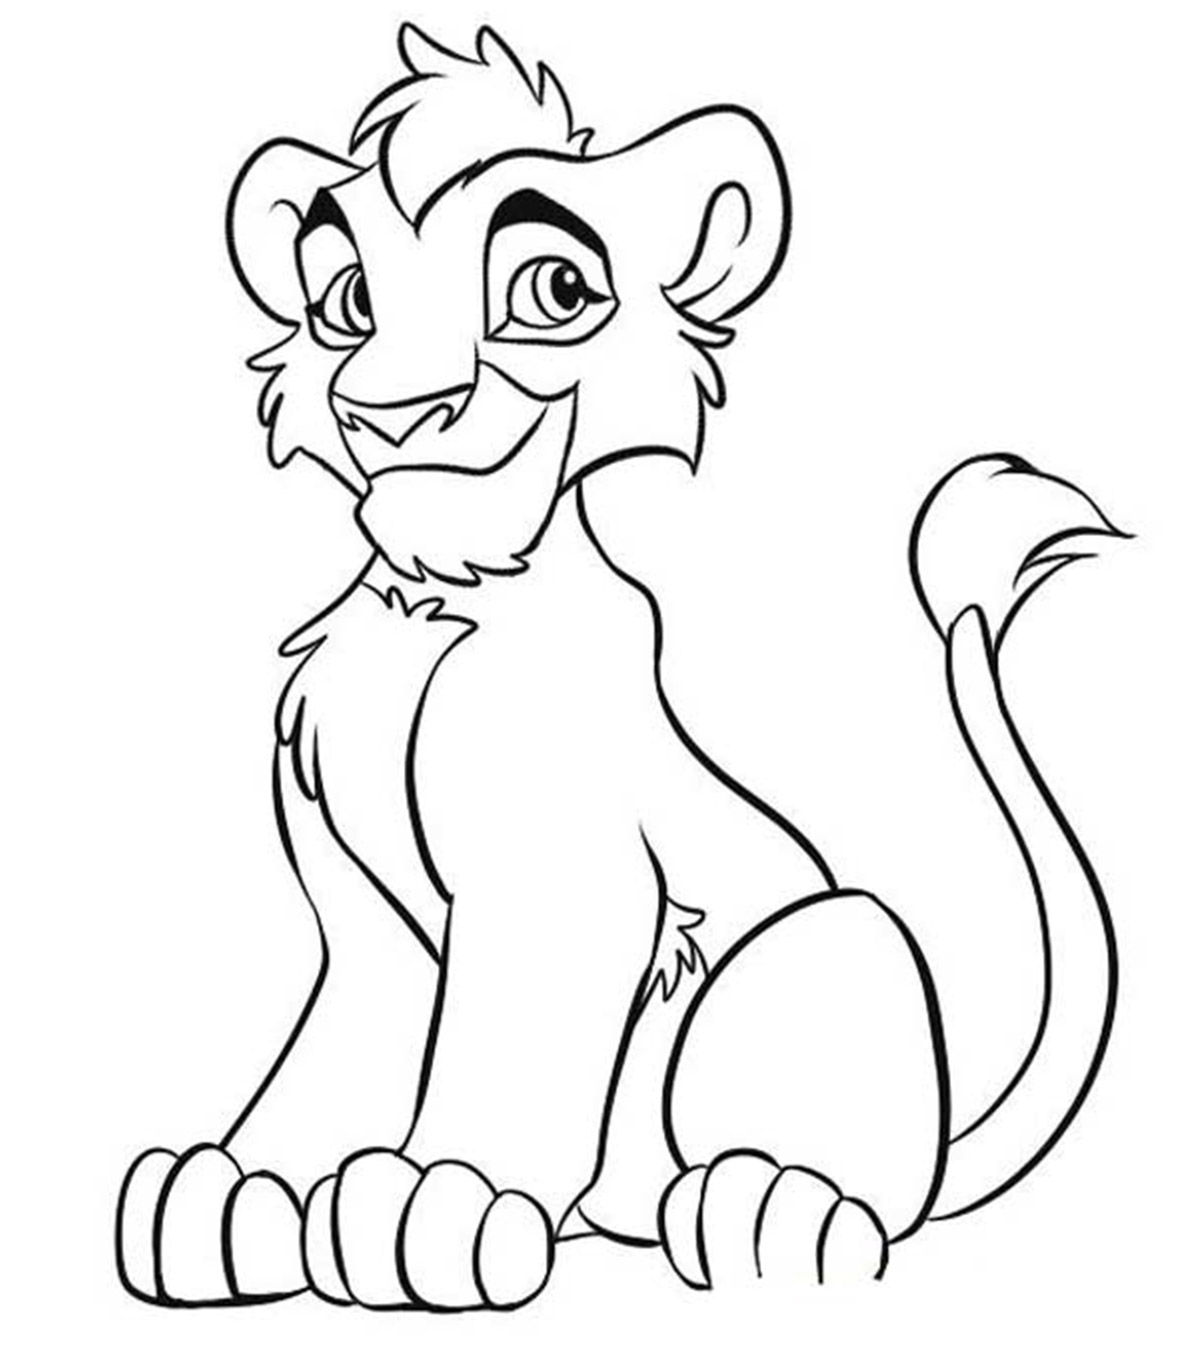 Top 25 The Lion King Coloring Pages Your Toddler Will Love To Do_image